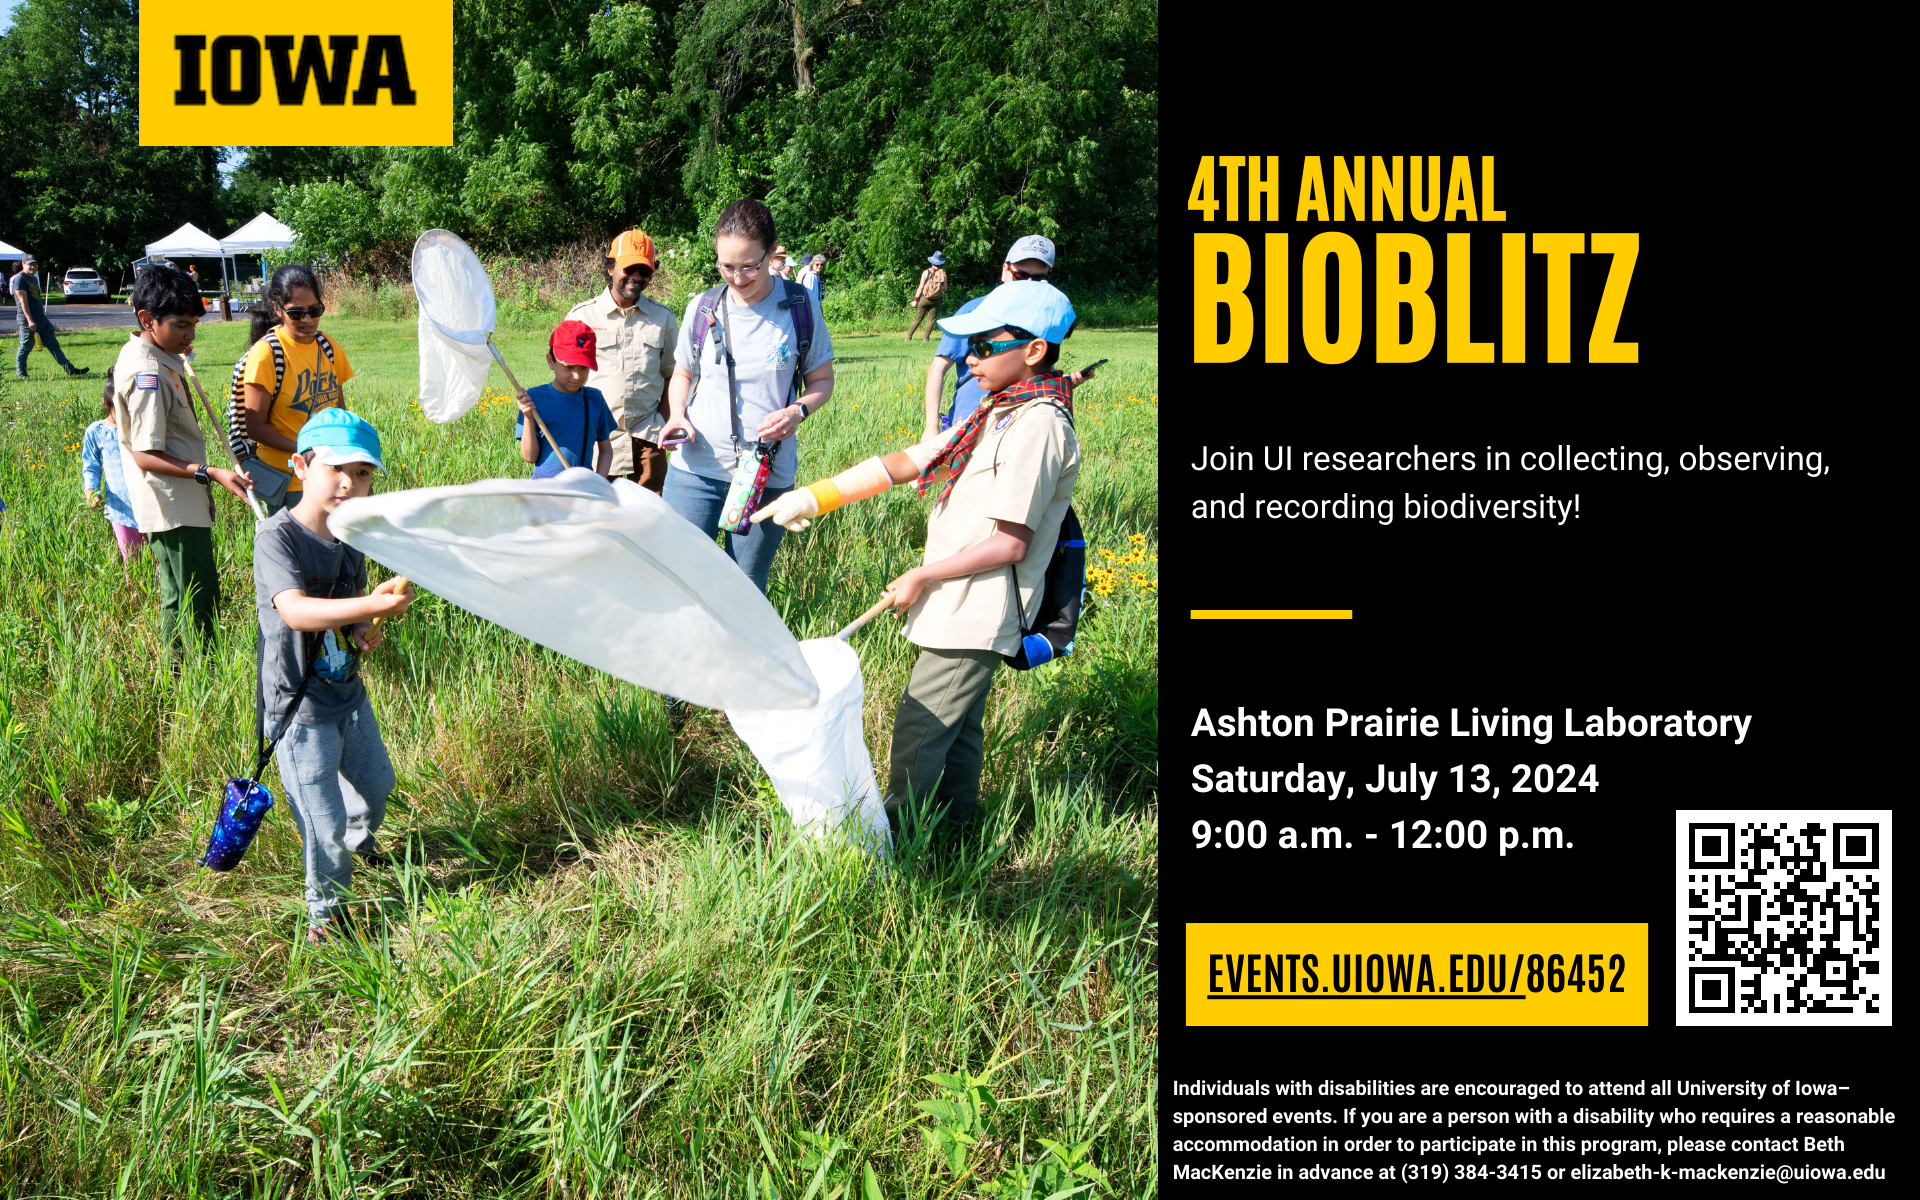 Join UI reearchers in collecting, observing, and recording biodiversity at the Ashton Prairie Living Laboratory on July 13 from 9 a.m.to noon.